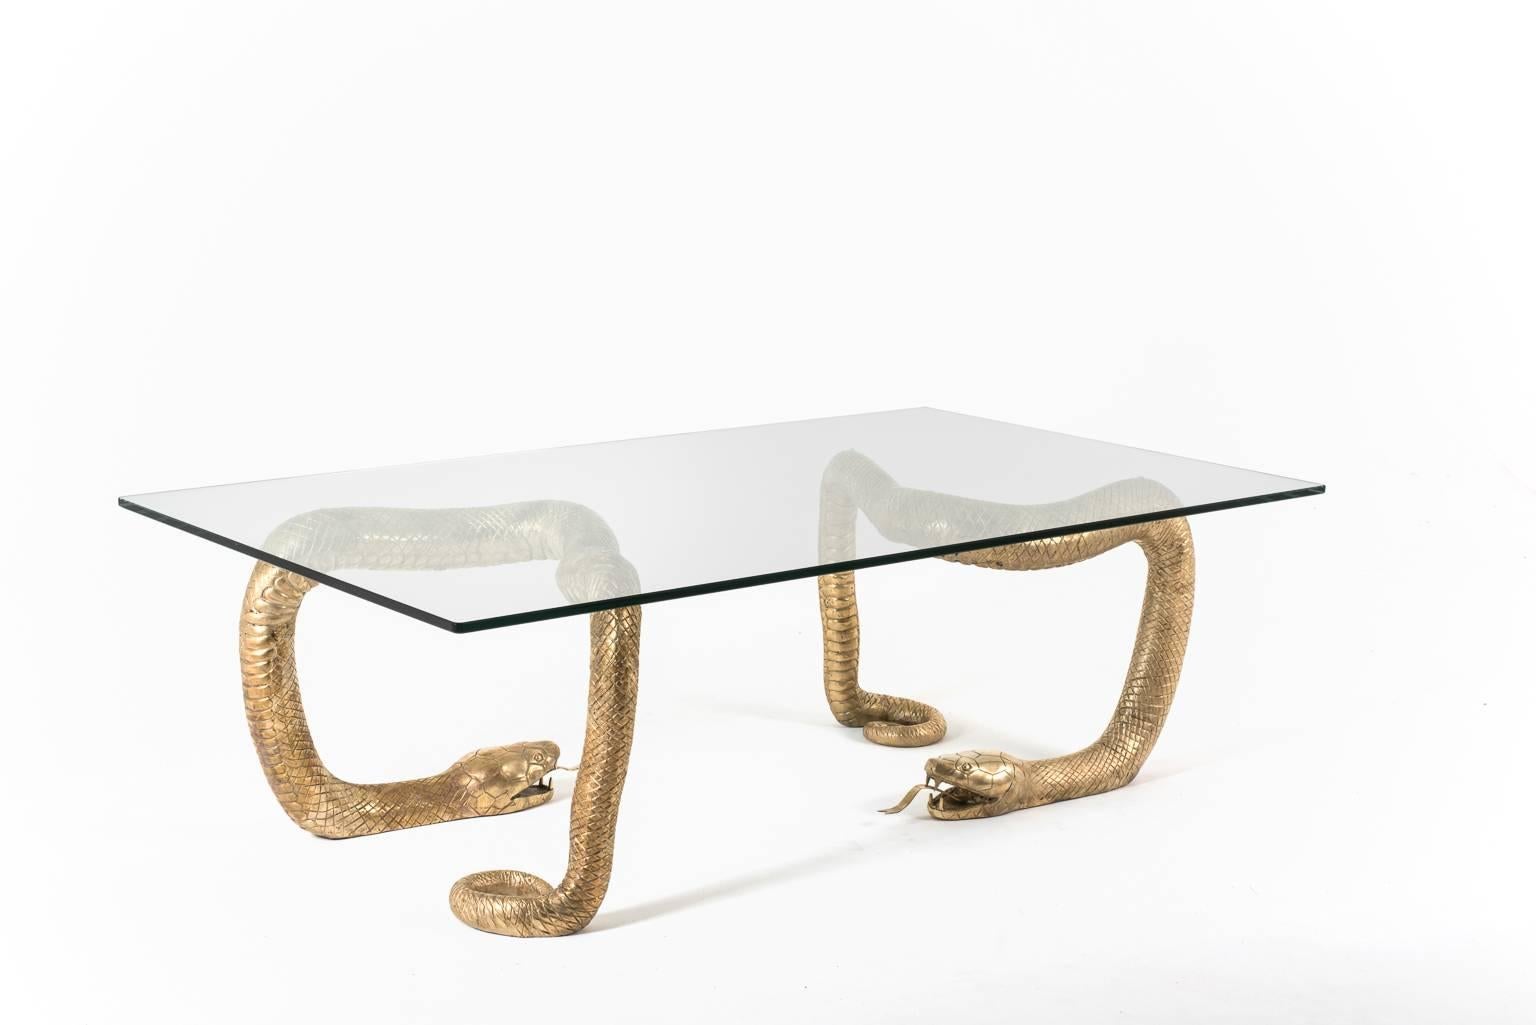 Exceptional brass ‘Python’ coffee table attributed to Alain Chervet, France, 1970s. The table comprised of two impressive and highly detailed brass snake sculptures, all handcrafted. The snakes support a big rectangular glass top. In excellent